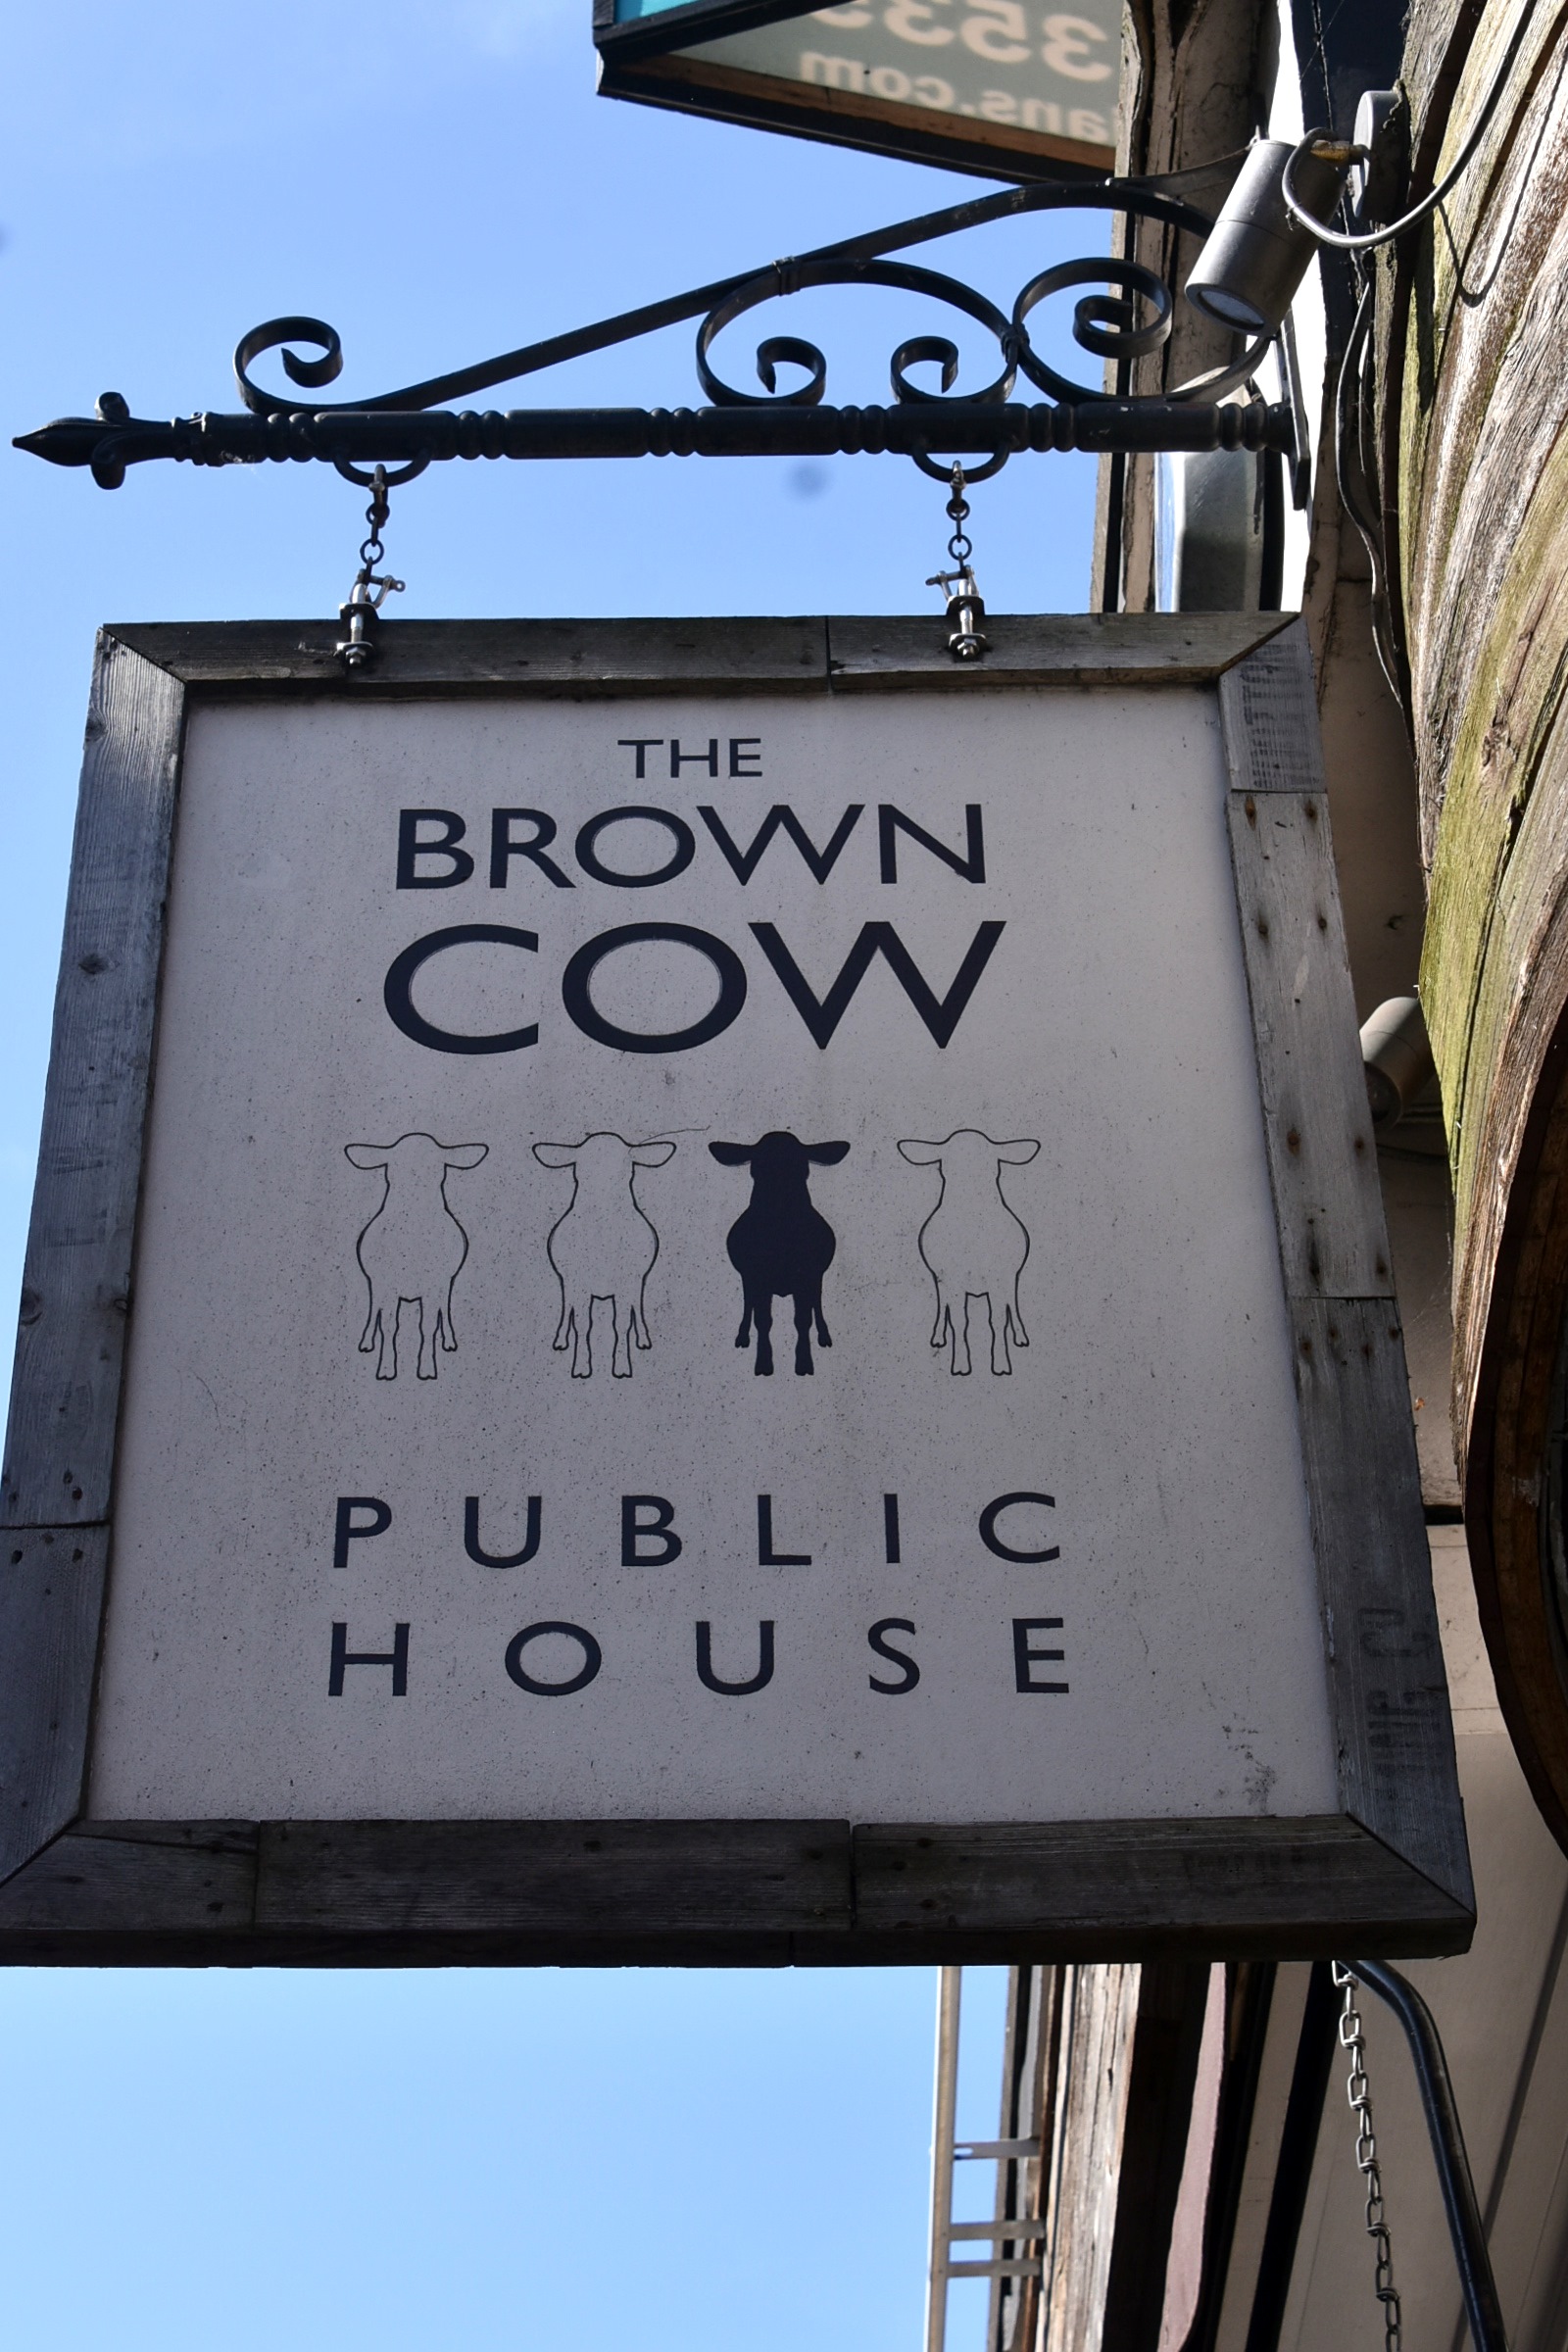 『The Brown Cow Public House』はこの看板が目印　Photo by 梅澤智子